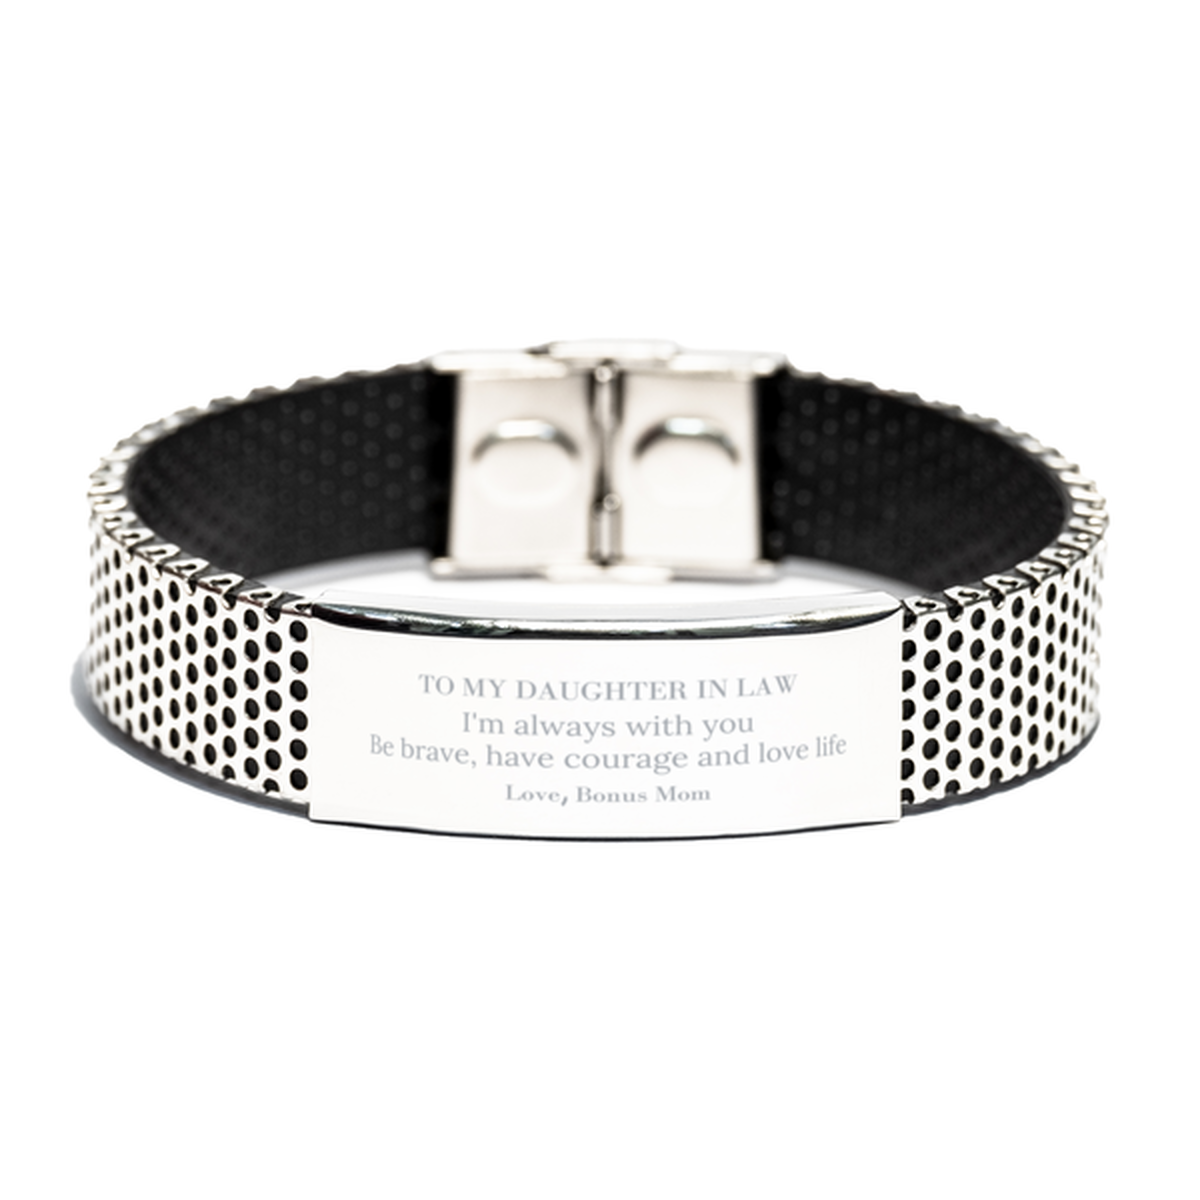 To My Daughter In Law Gifts from Bonus Mom, Unique Stainless Steel Bracelet Inspirational Christmas Birthday Graduation Gifts for Daughter In Law I'm always with you. Be brave, have courage and love life. Love, Bonus Mom